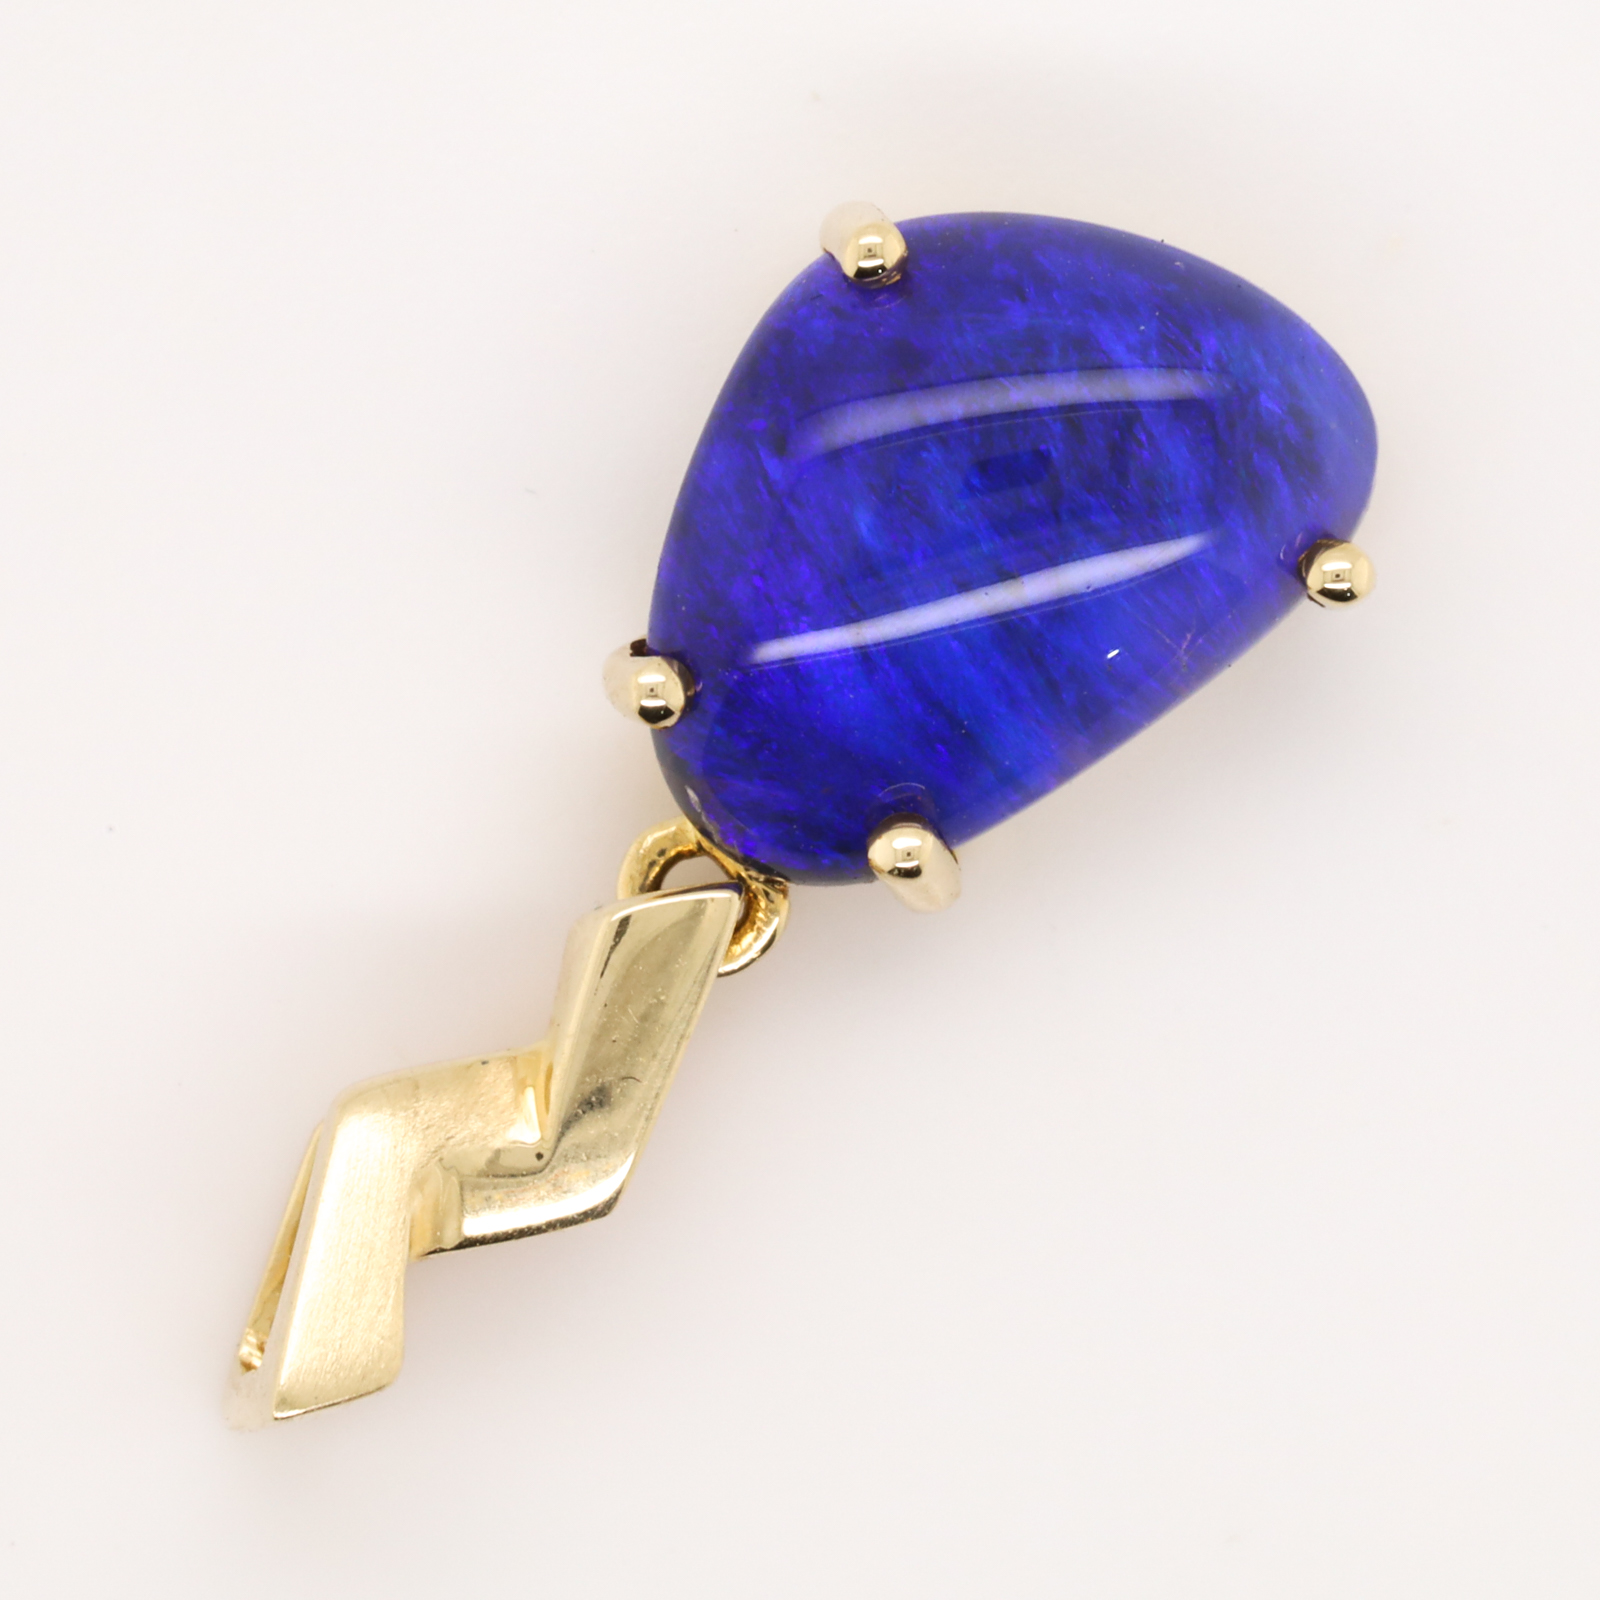 Blue and Purple Yellow Gold Solid Australian Black Opal Necklace Pendant